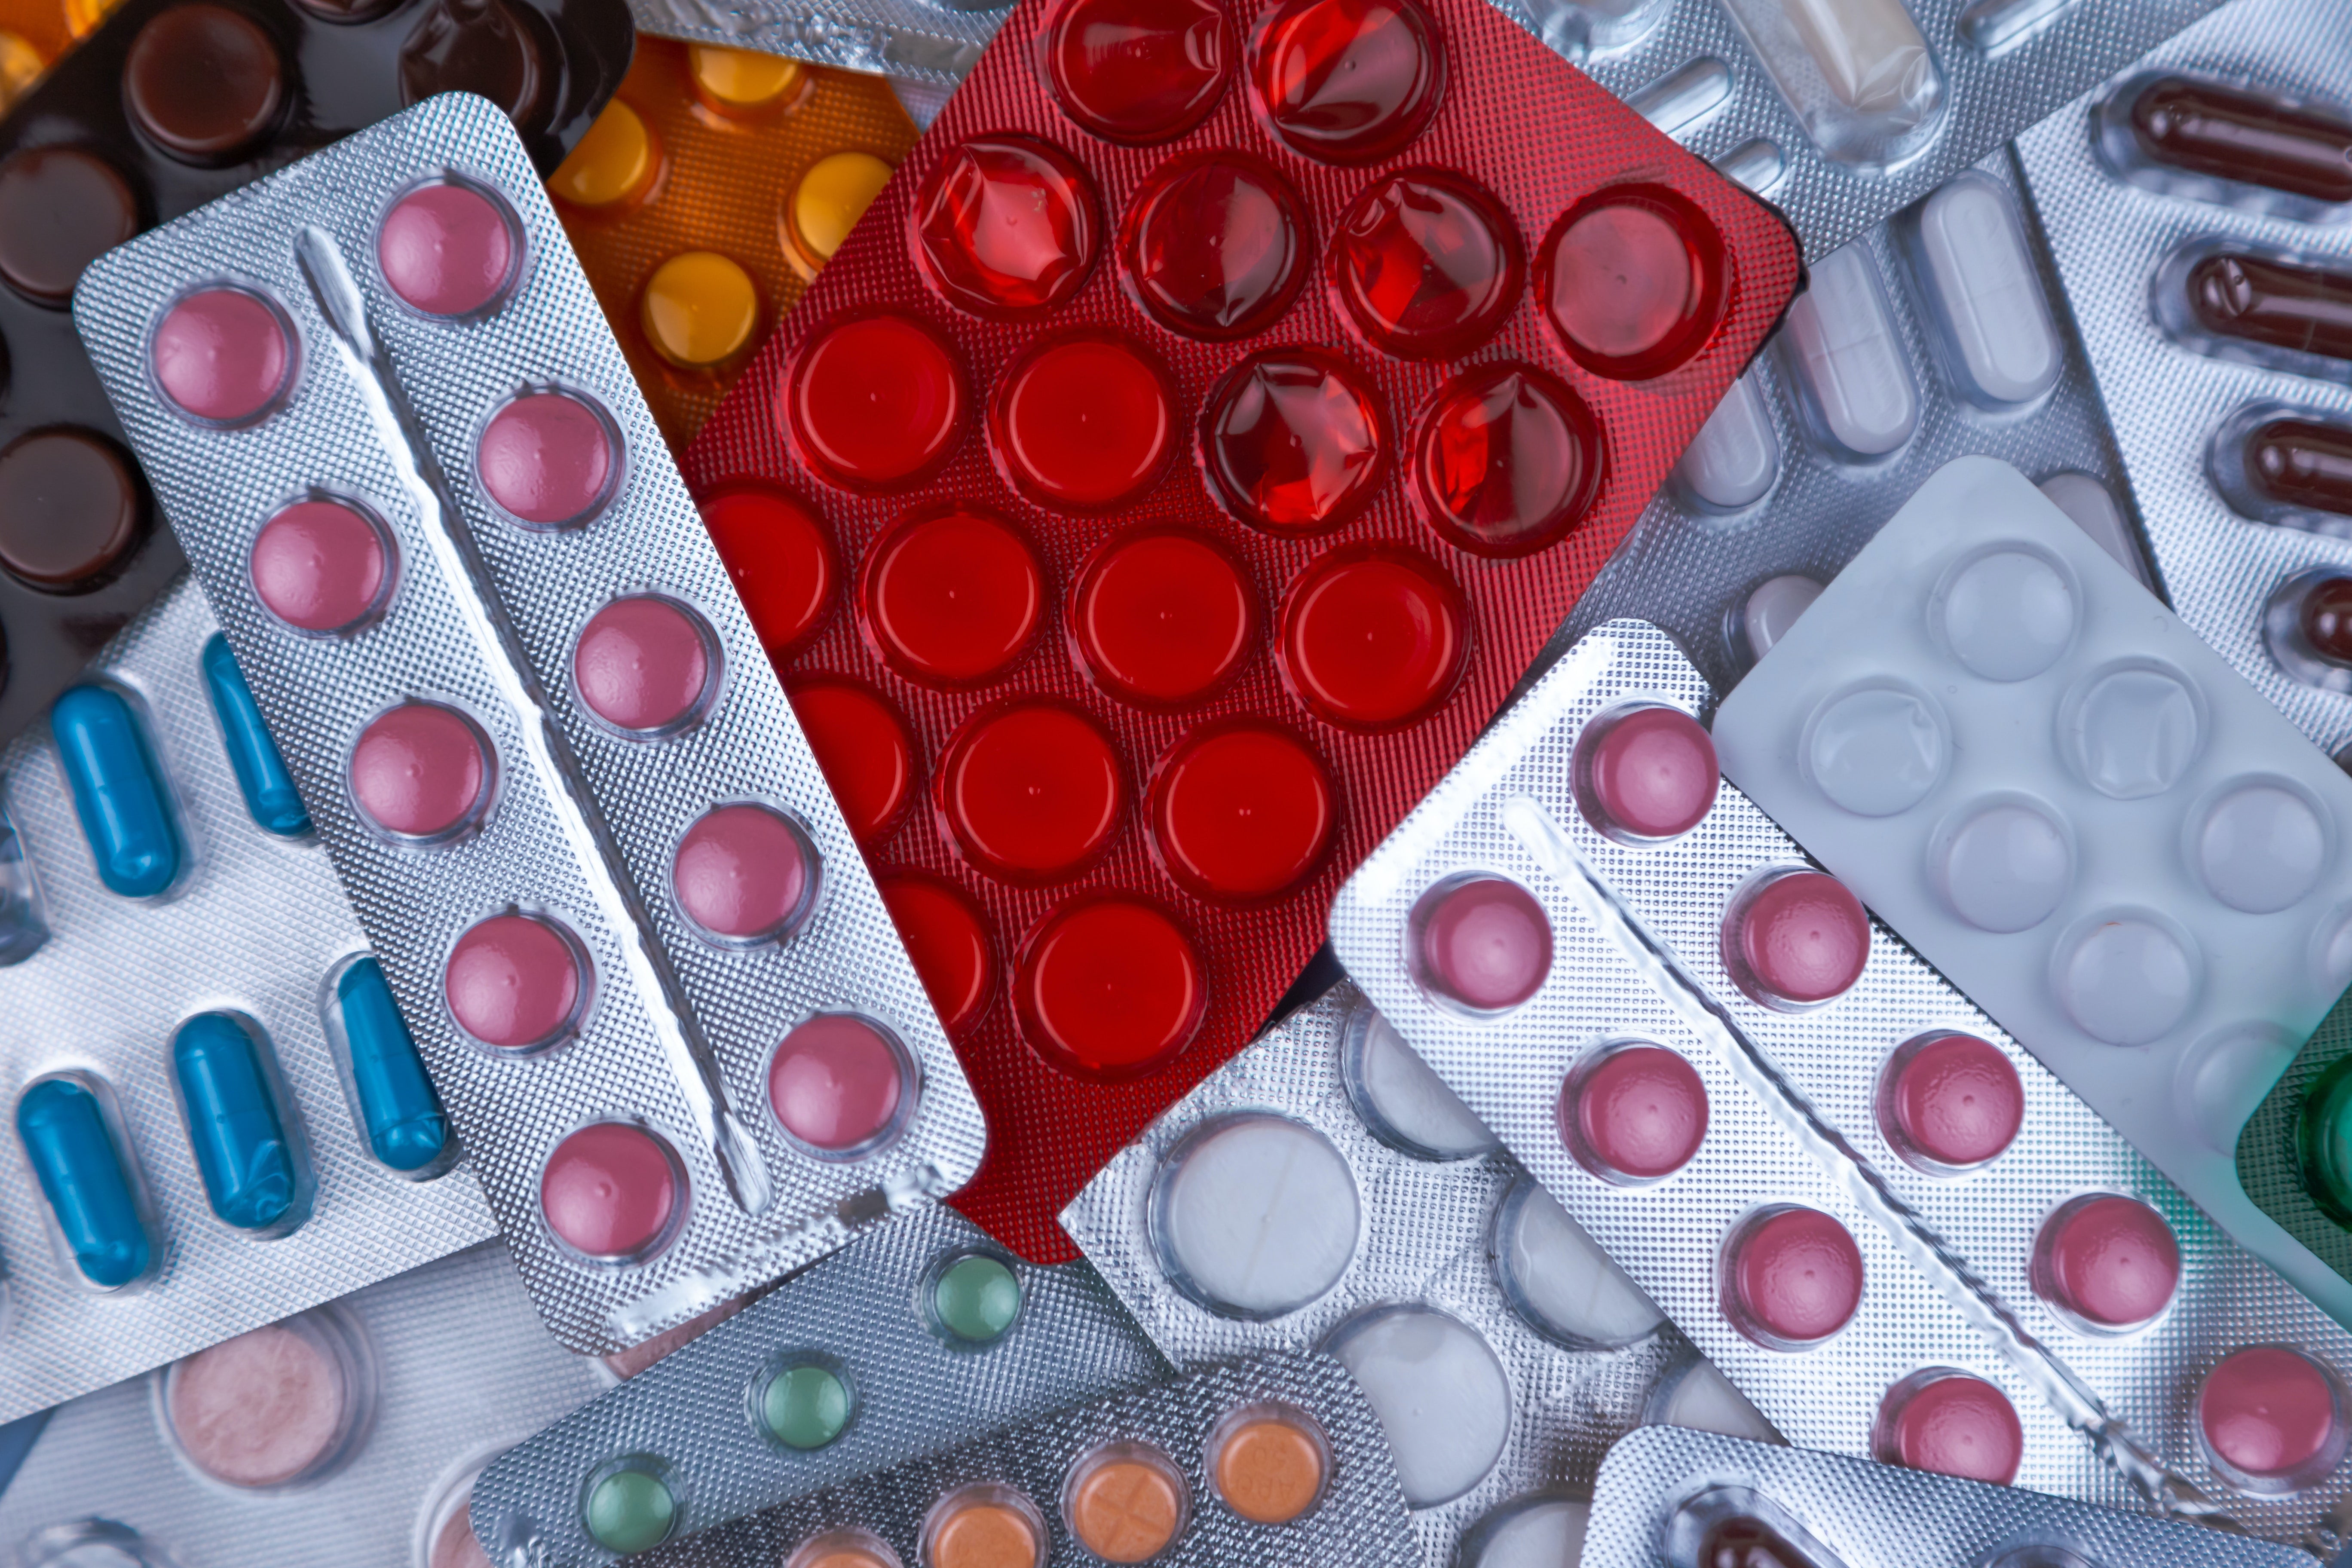 Pile of blister packs of colorful medicine tablets.